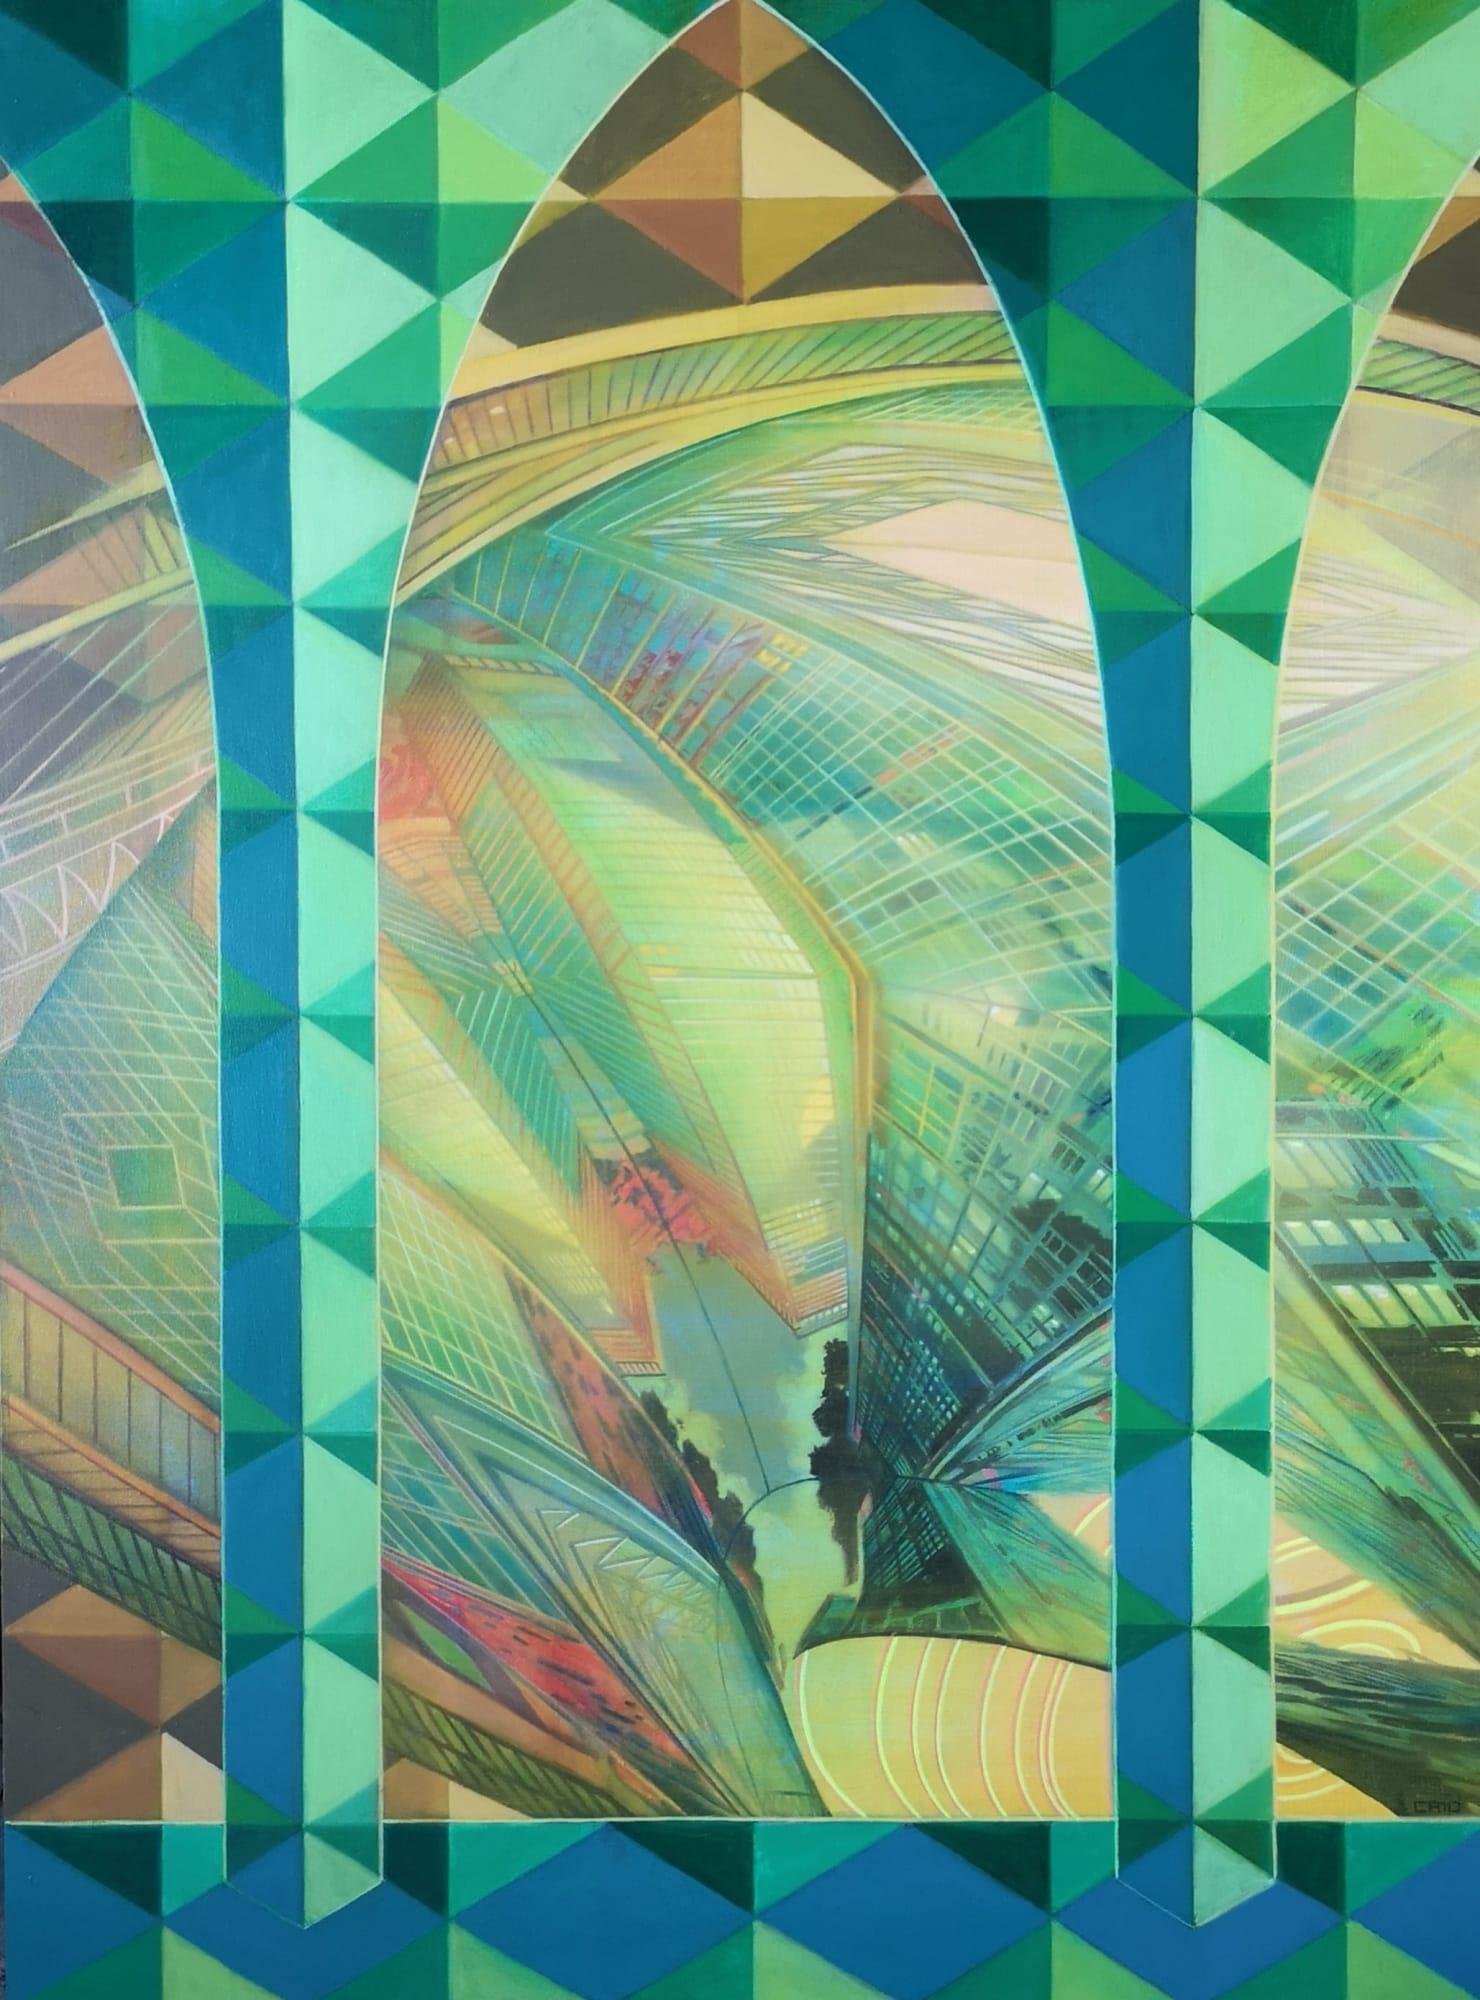 In Caio Locke's painting "Place No Place" (2019), a captivating and immersive scene unfolds, enveloping viewers in a world of vibrant green hues and mesmerizing geometric patterns. The composition is defined by a play of intersecting lines and